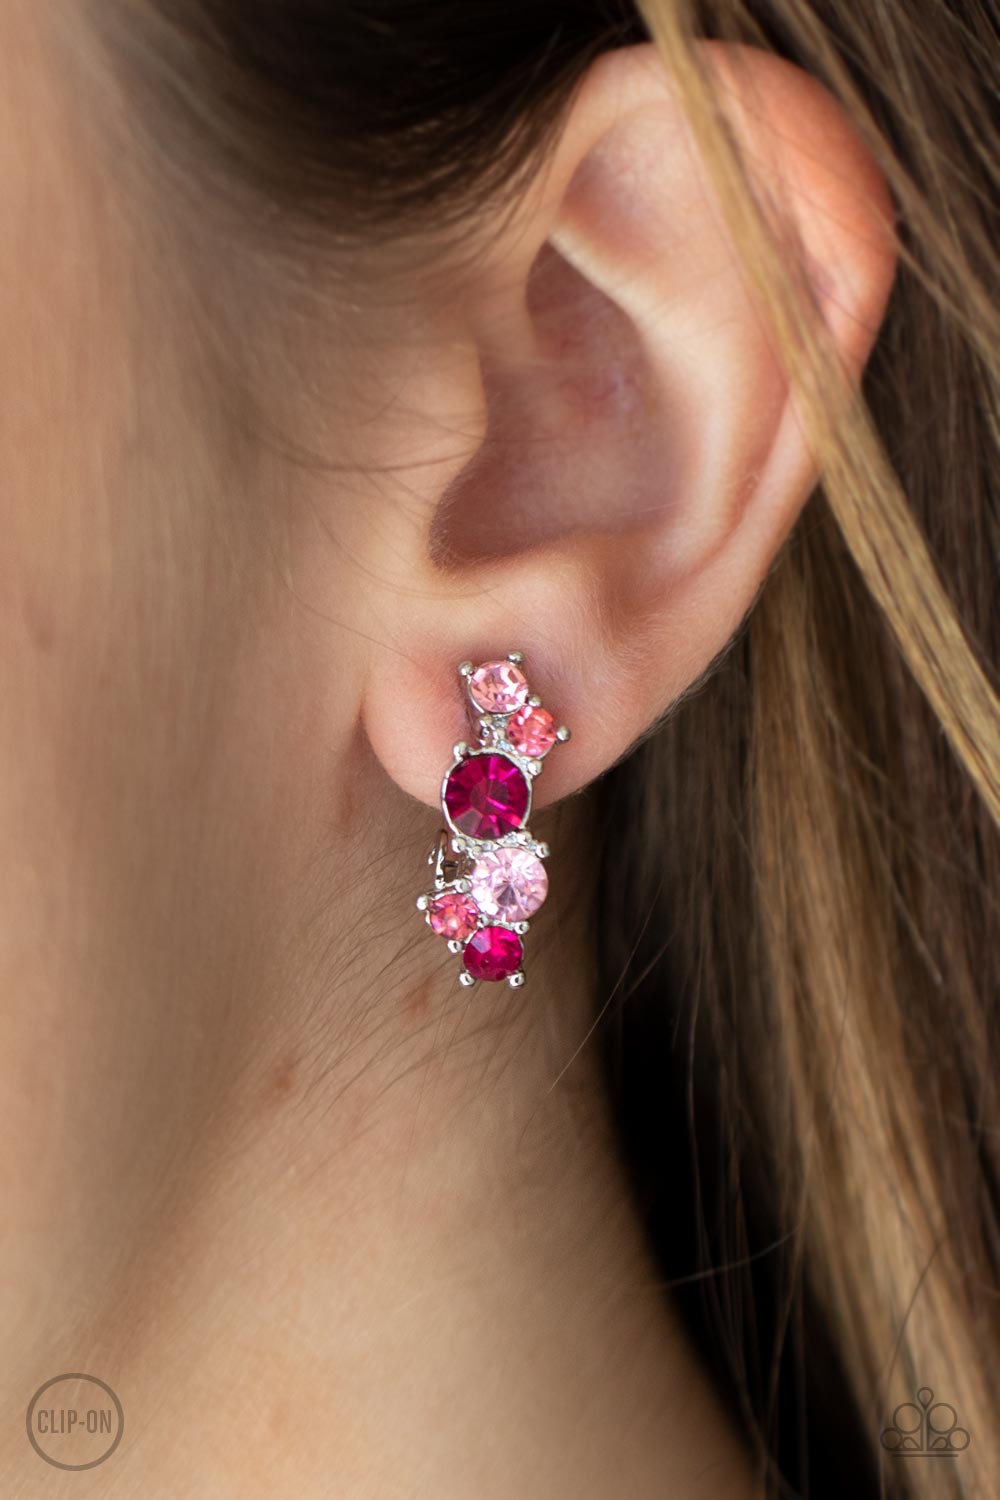 Cosmic Celebration Pink Clip-On Earring - Paparazzi Accessories  Varying in shades of pink, mismatched rhinestones delicately coalesce into a dainty frame for a colorfully sparkly display. Earring attaches to a standard clip-on fitting.  Sold as one pair of clip-on earrings.